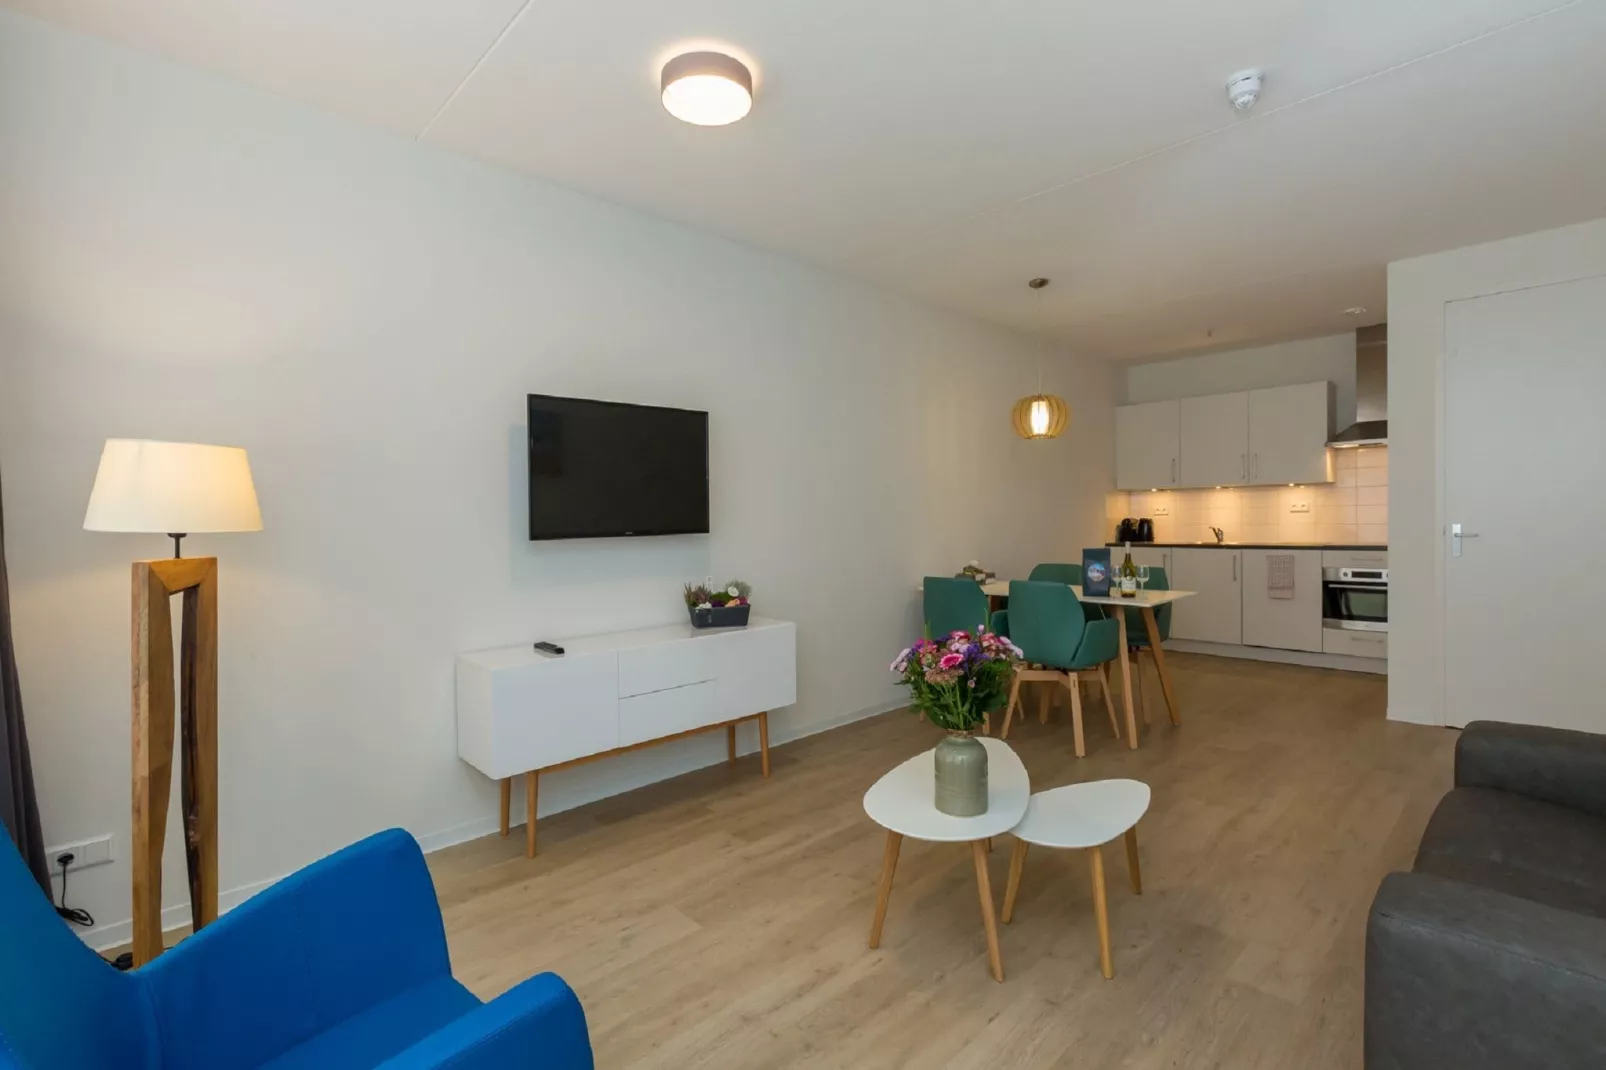 Aparthotel Zoutelande - 6 pers luxe appartement-Woonkamer